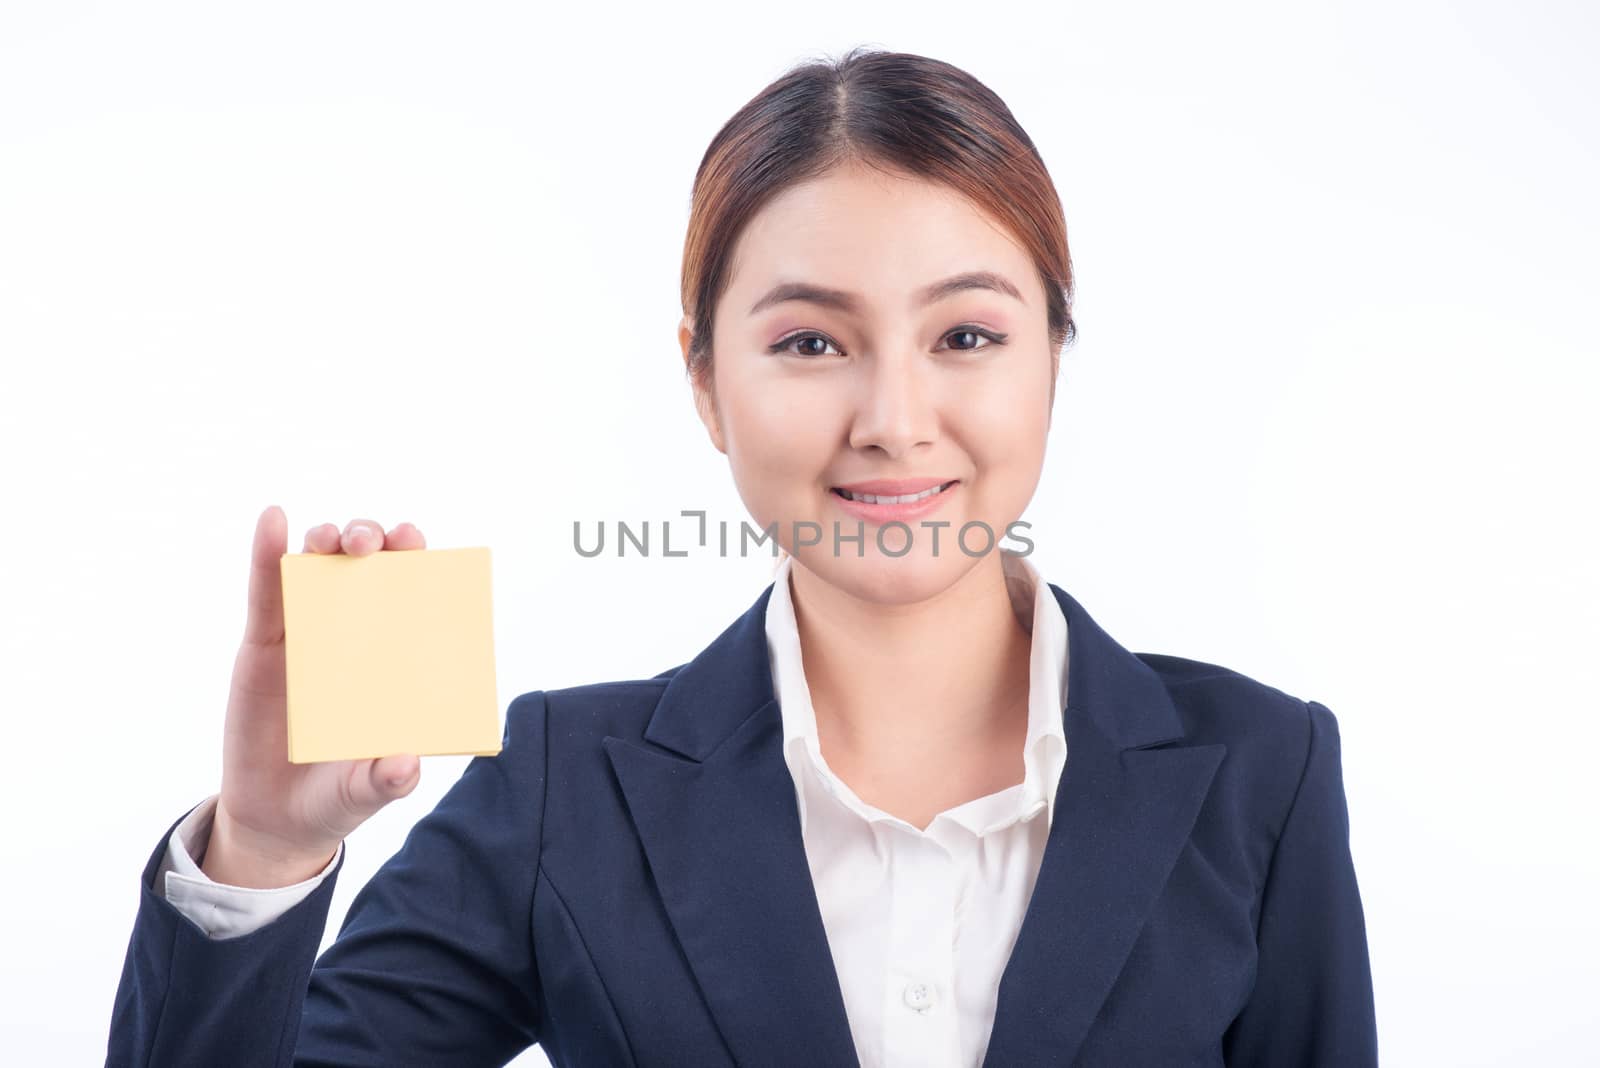 A portrait of a young smiling business woman showing blank sticky note isolated on white background.